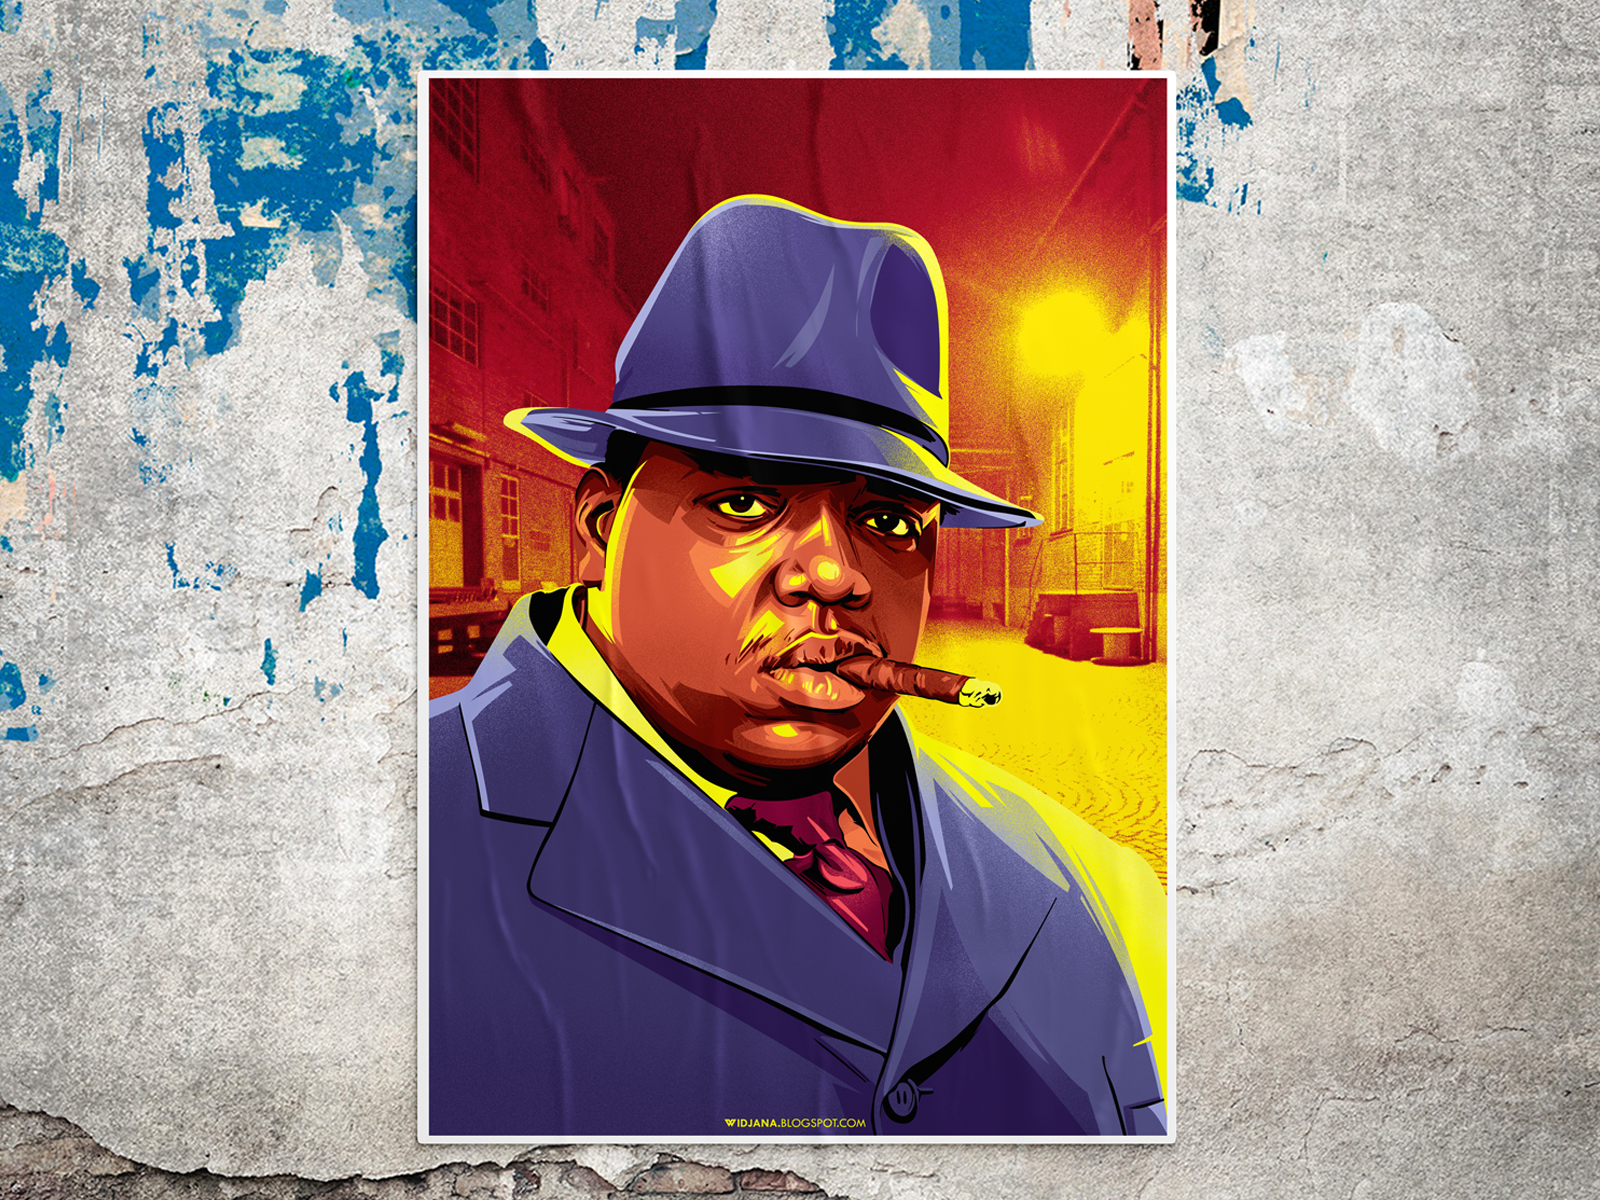 Notorious B.I.G Wallpapers - Top 30 Best Notorious B.I.G Wallpapers Download